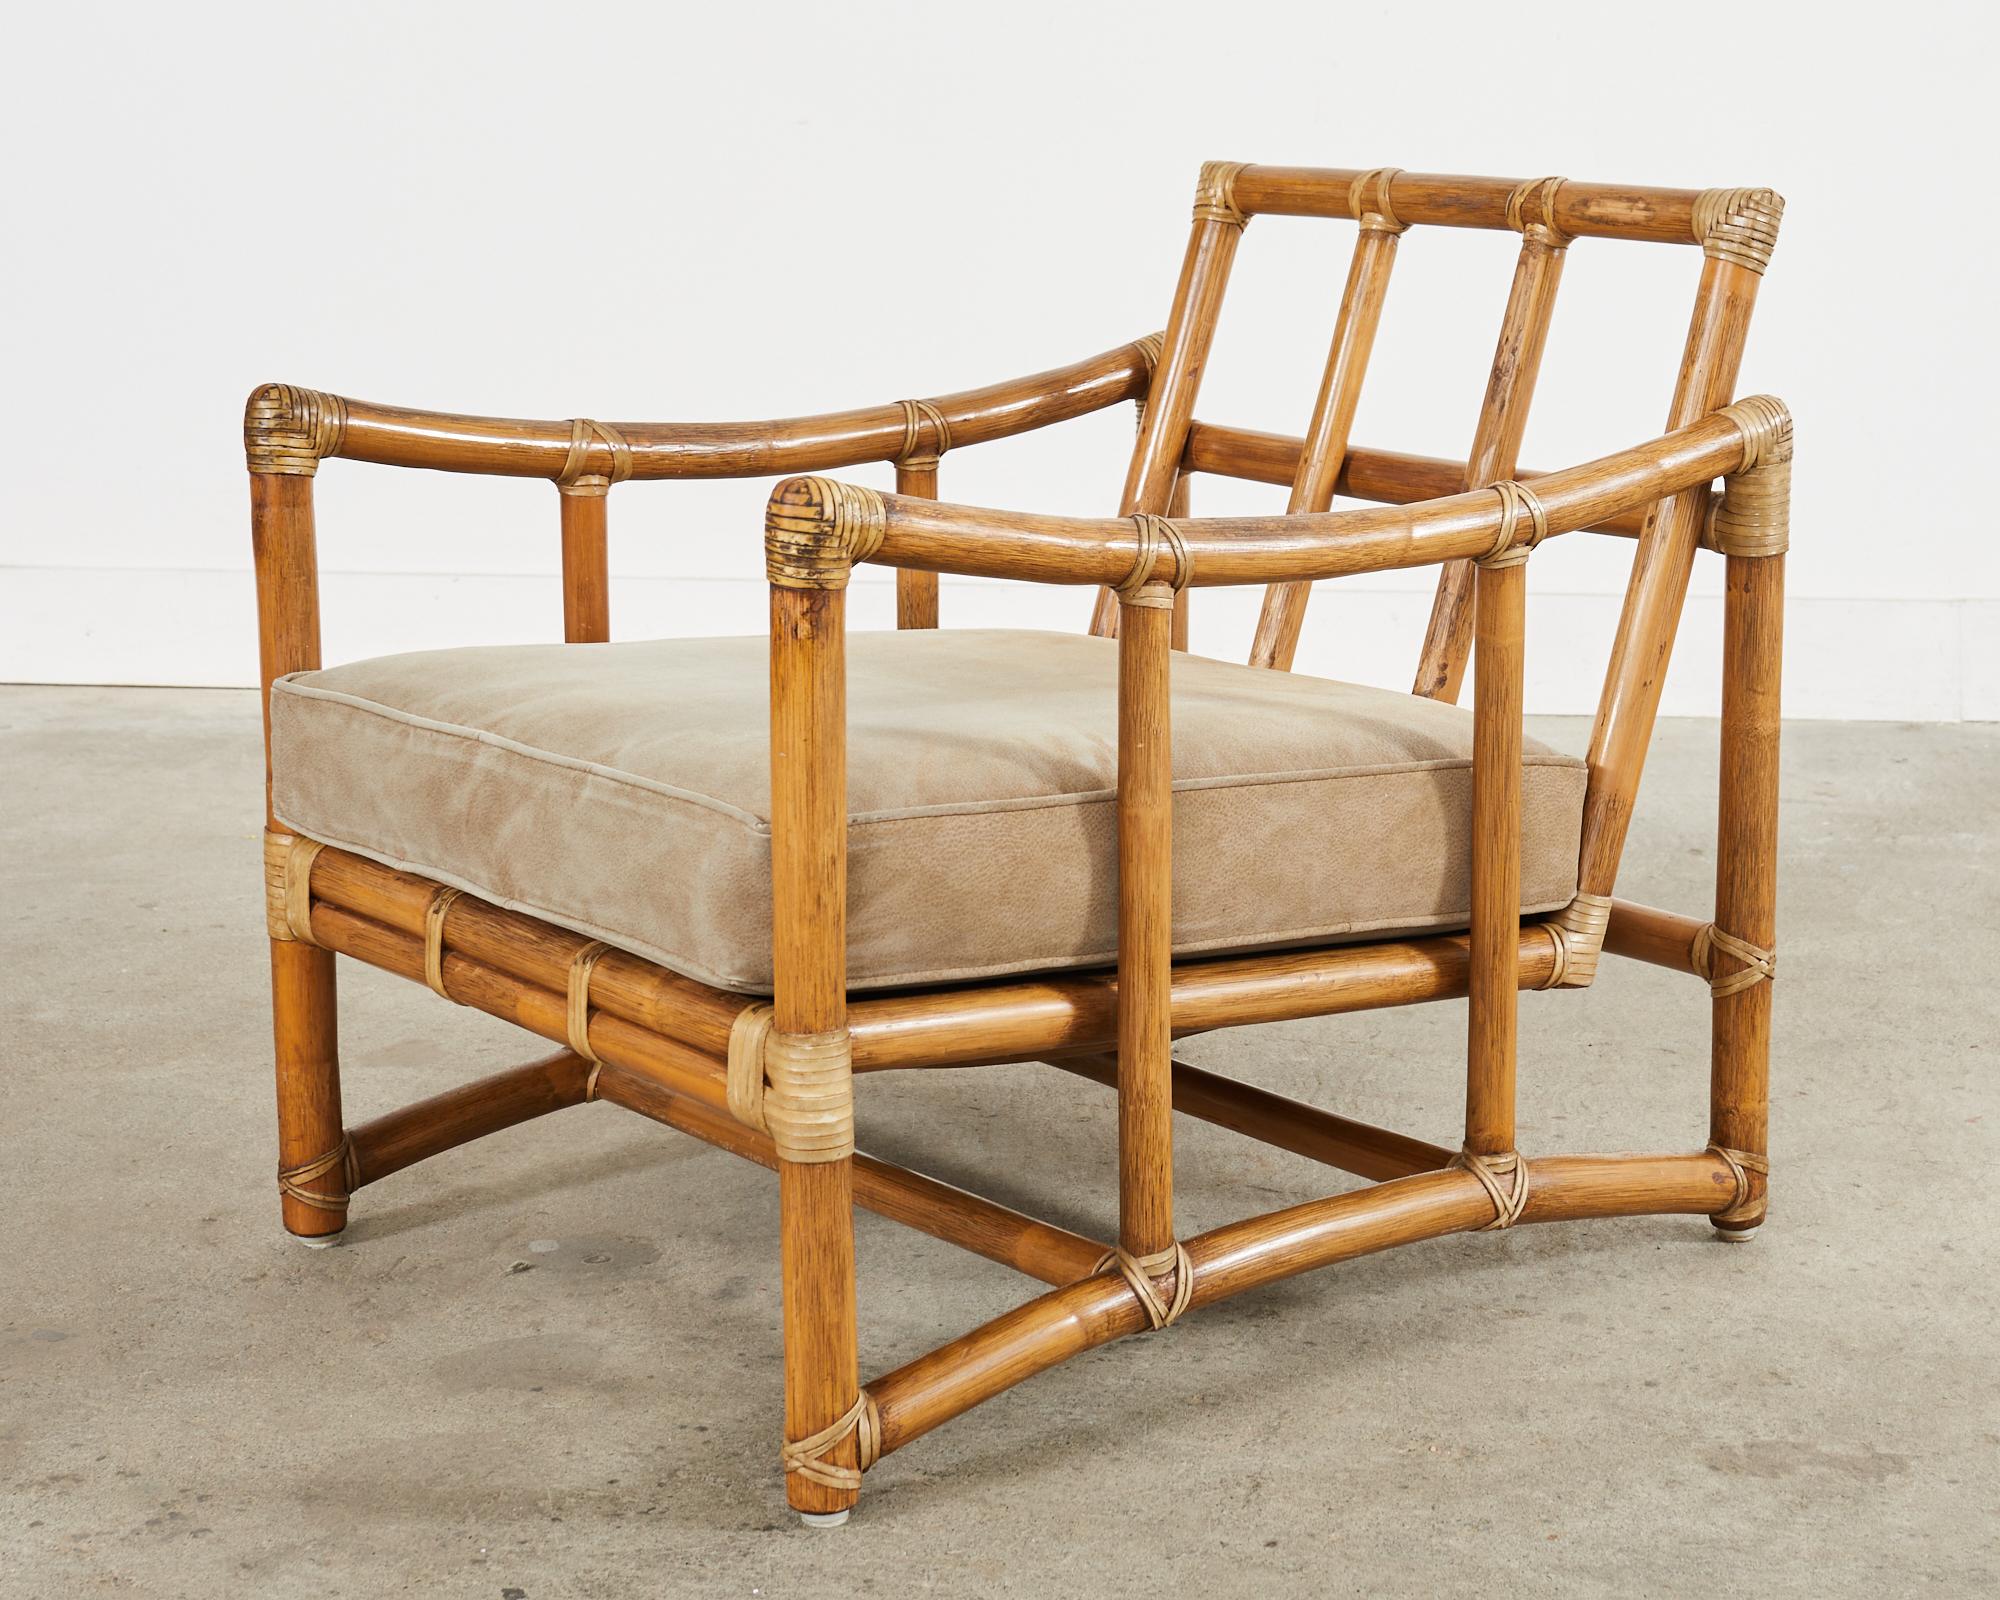 20th Century McGuire Organic Modern Bent Rattan Lounge Chair and Ottoman For Sale